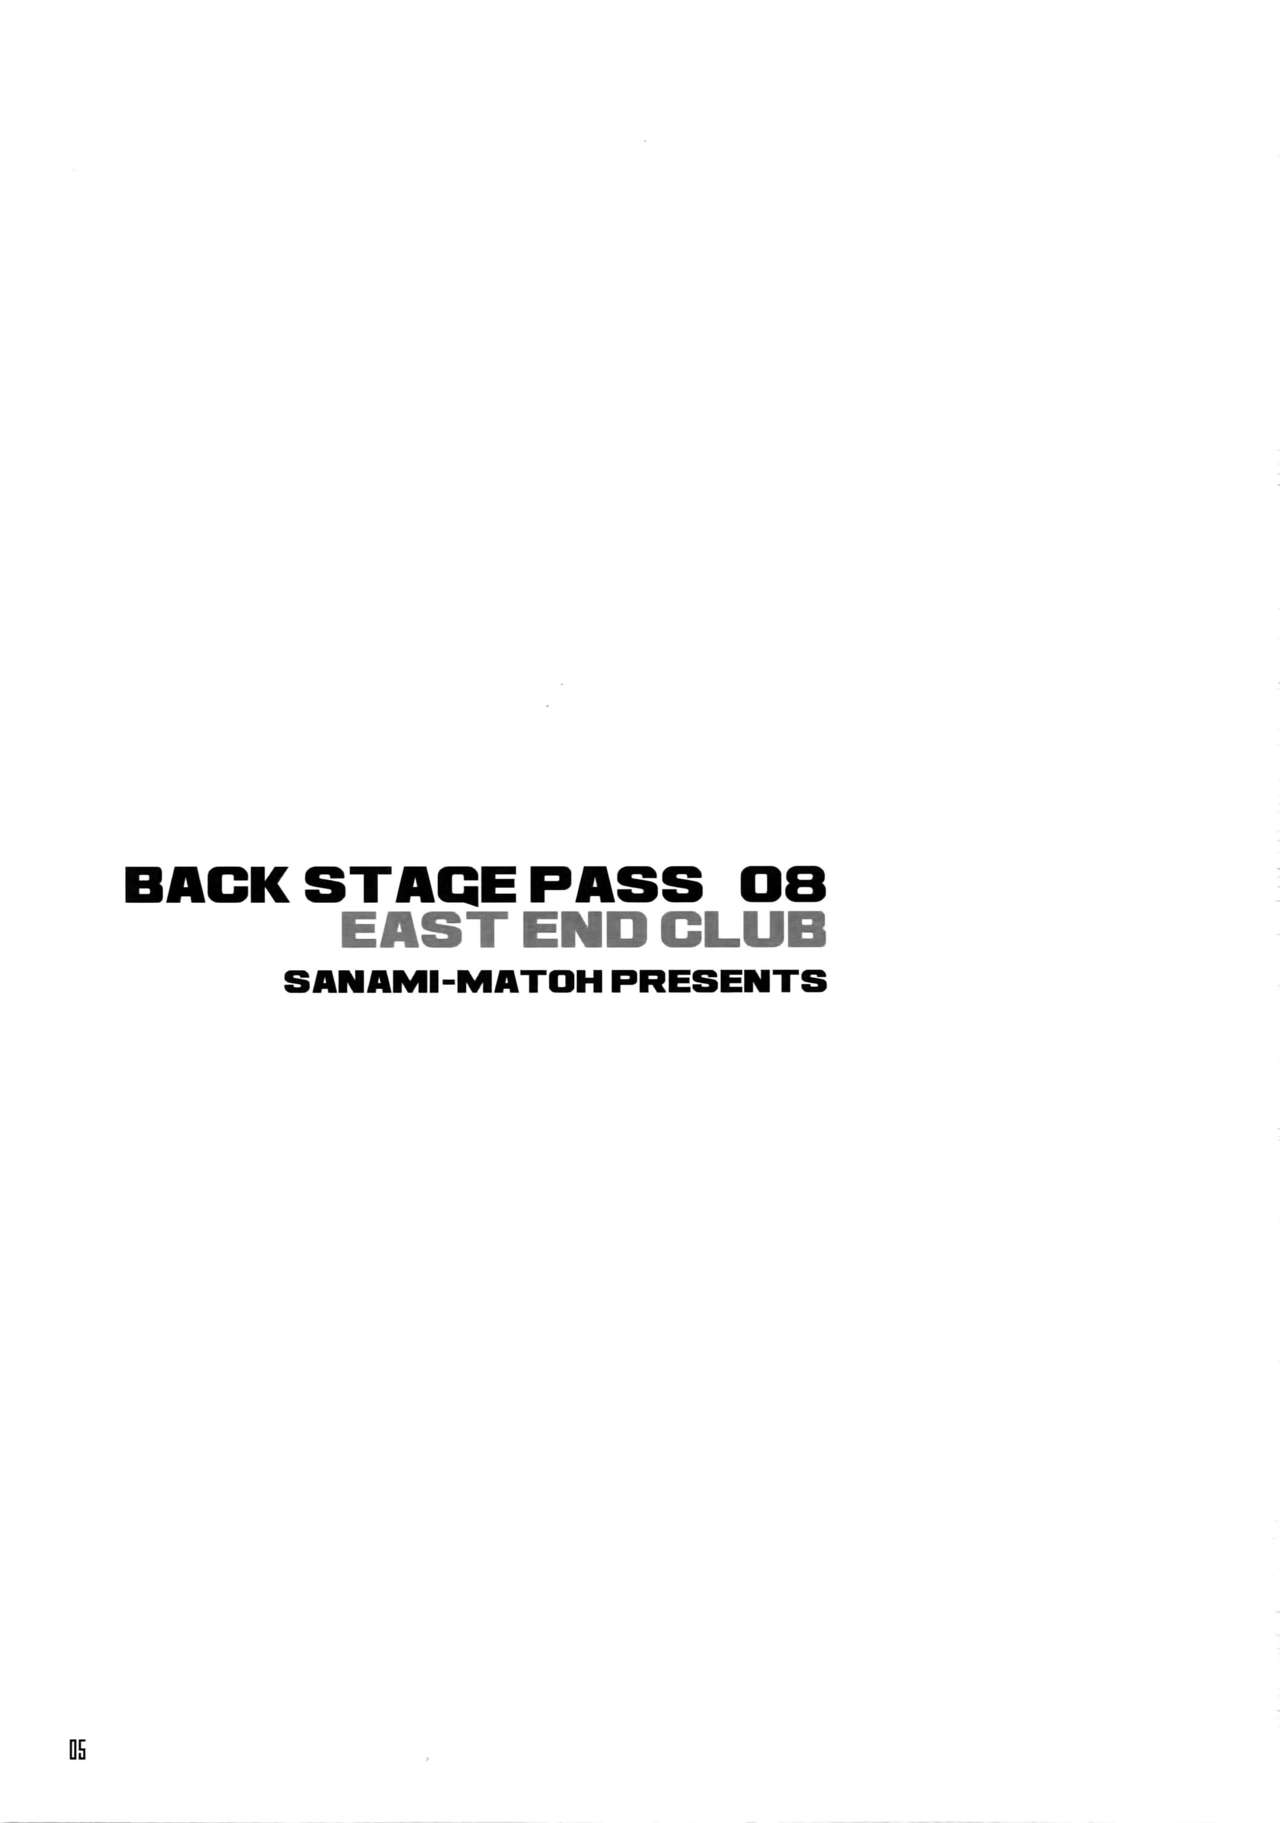 (C92) [East End Club (Matoh Sanami)] BACK STAGE PASS 08 1